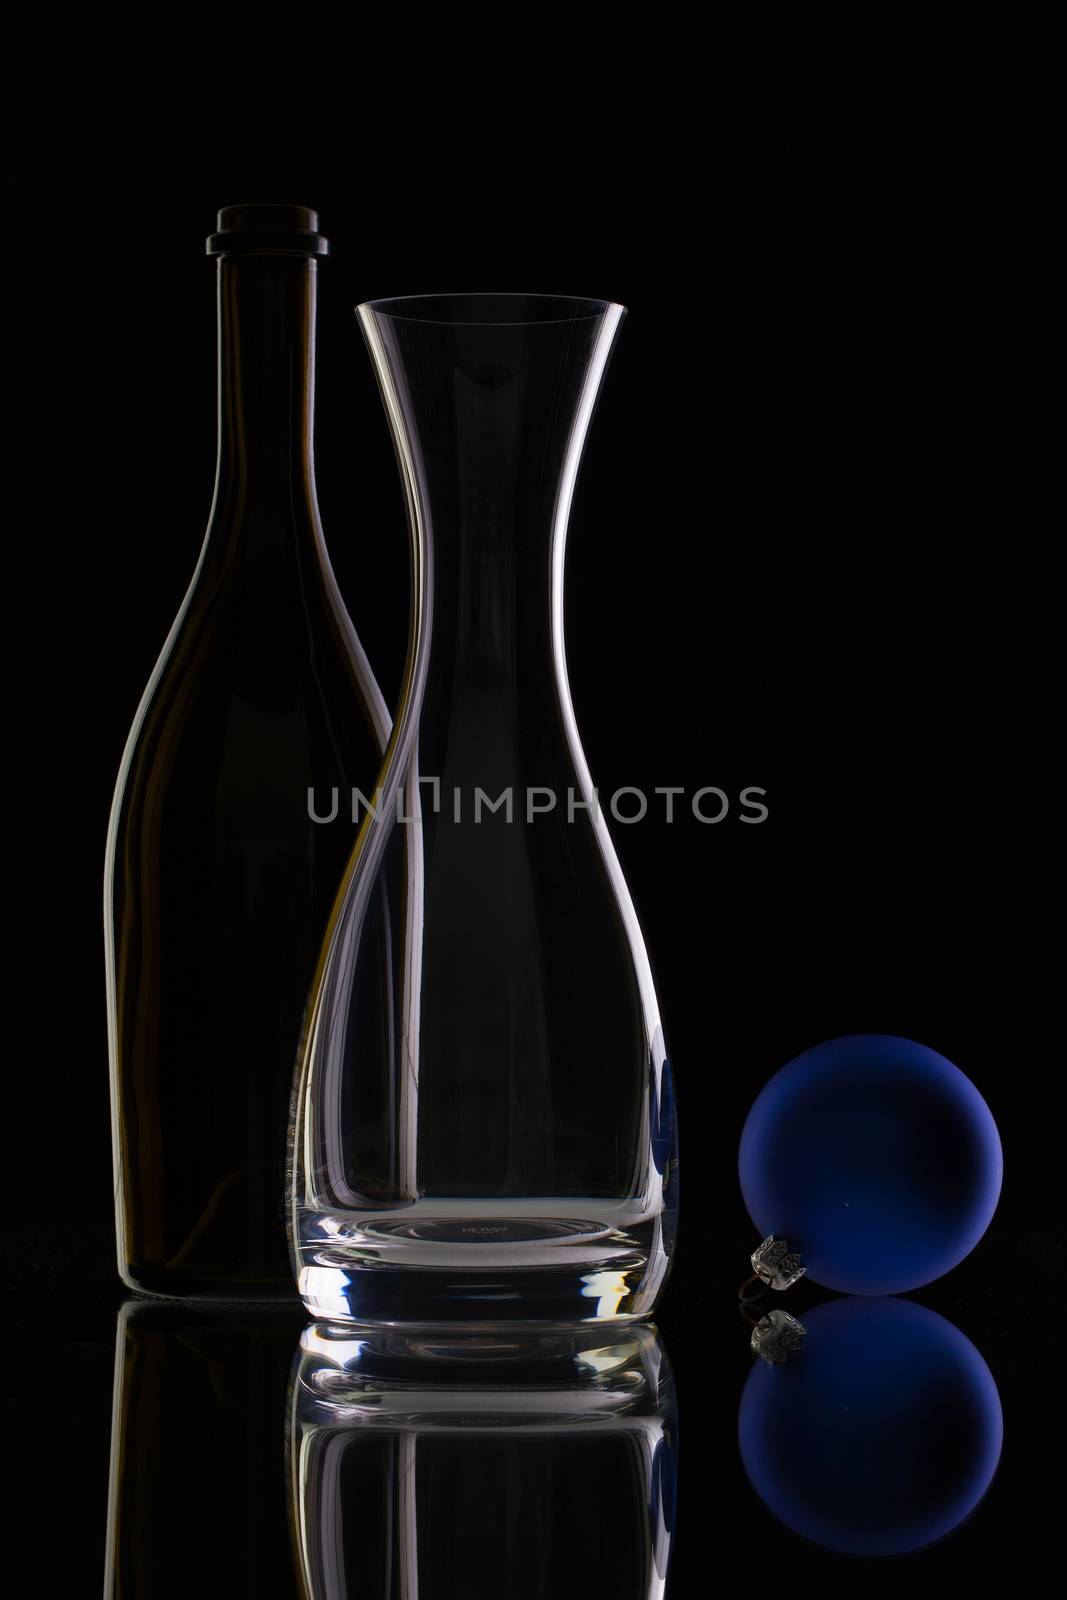 The bottle of wine,glass carafe and Christmas decoration on a black glass desk